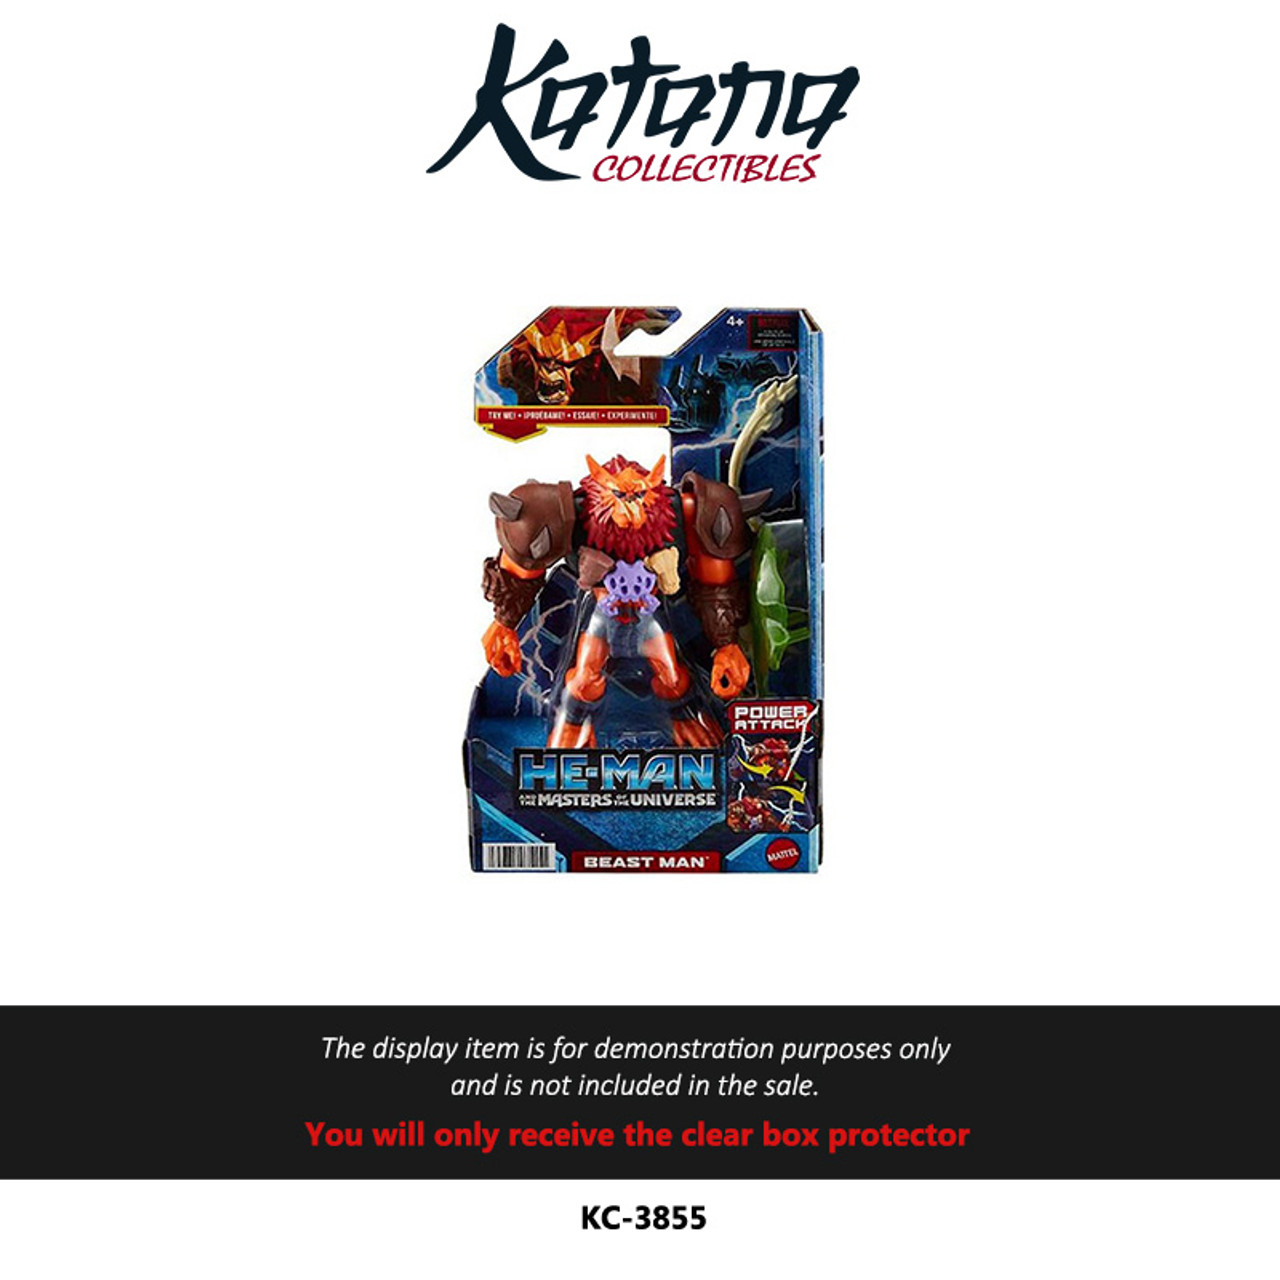 Katana Collectibles Protector For He-Man and the Masters of the Universe Deluxe Figures